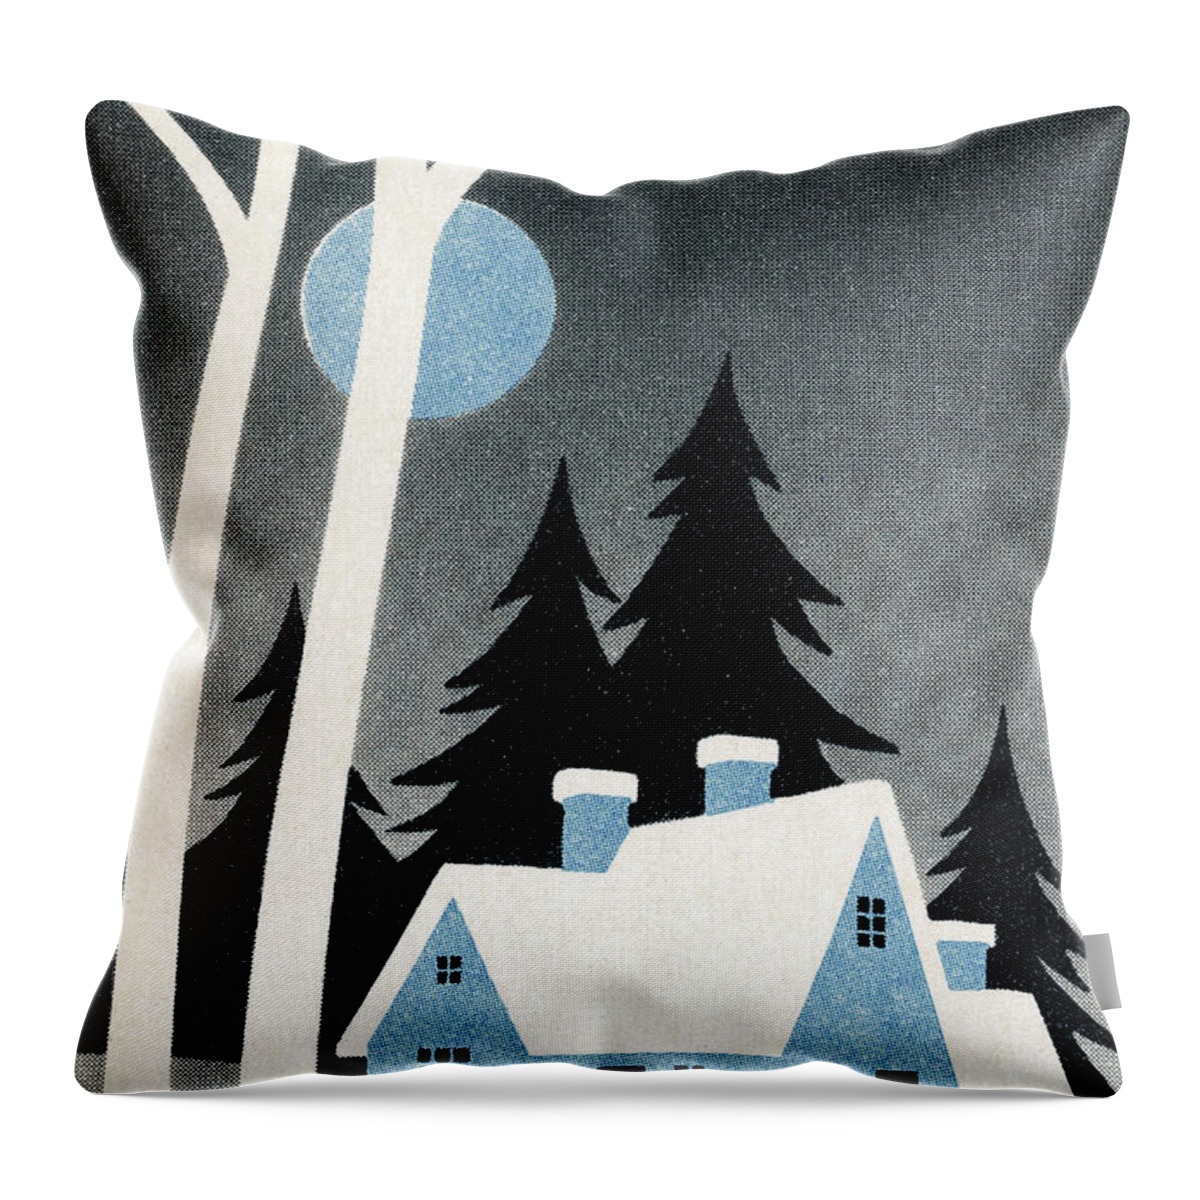 Campy Throw Pillow featuring the drawing Winter Landscape With House by CSA Images